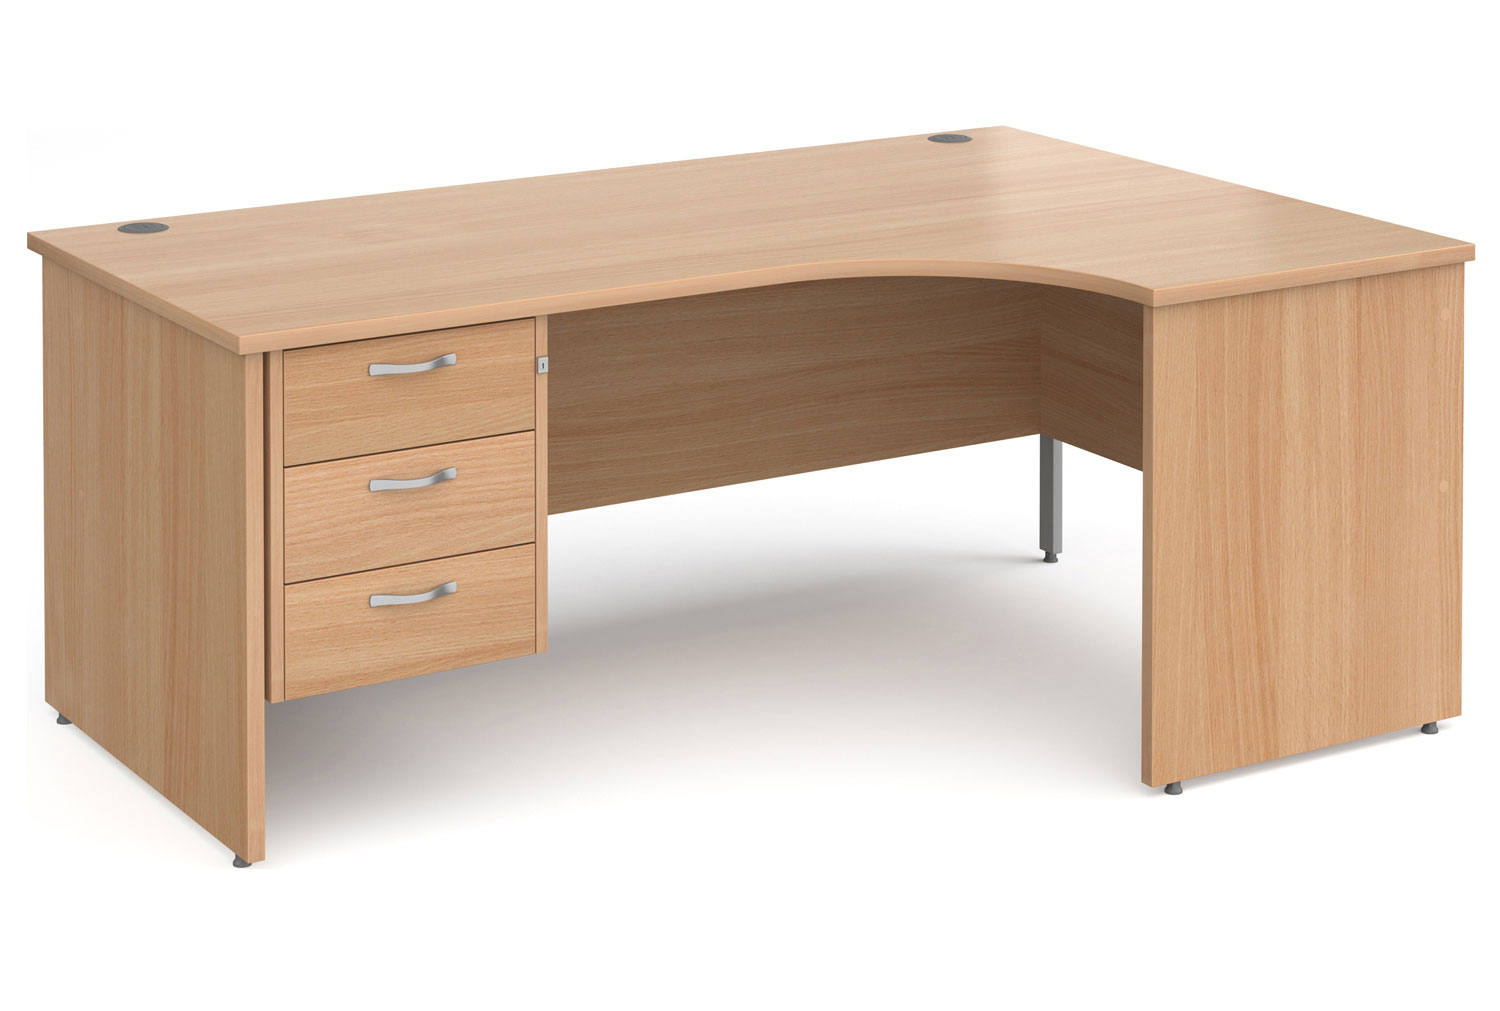 Tully Panel End Right Hand Ergonomic Office Desk 3 Drawers, 180wx120/80dx73h (cm), Beech